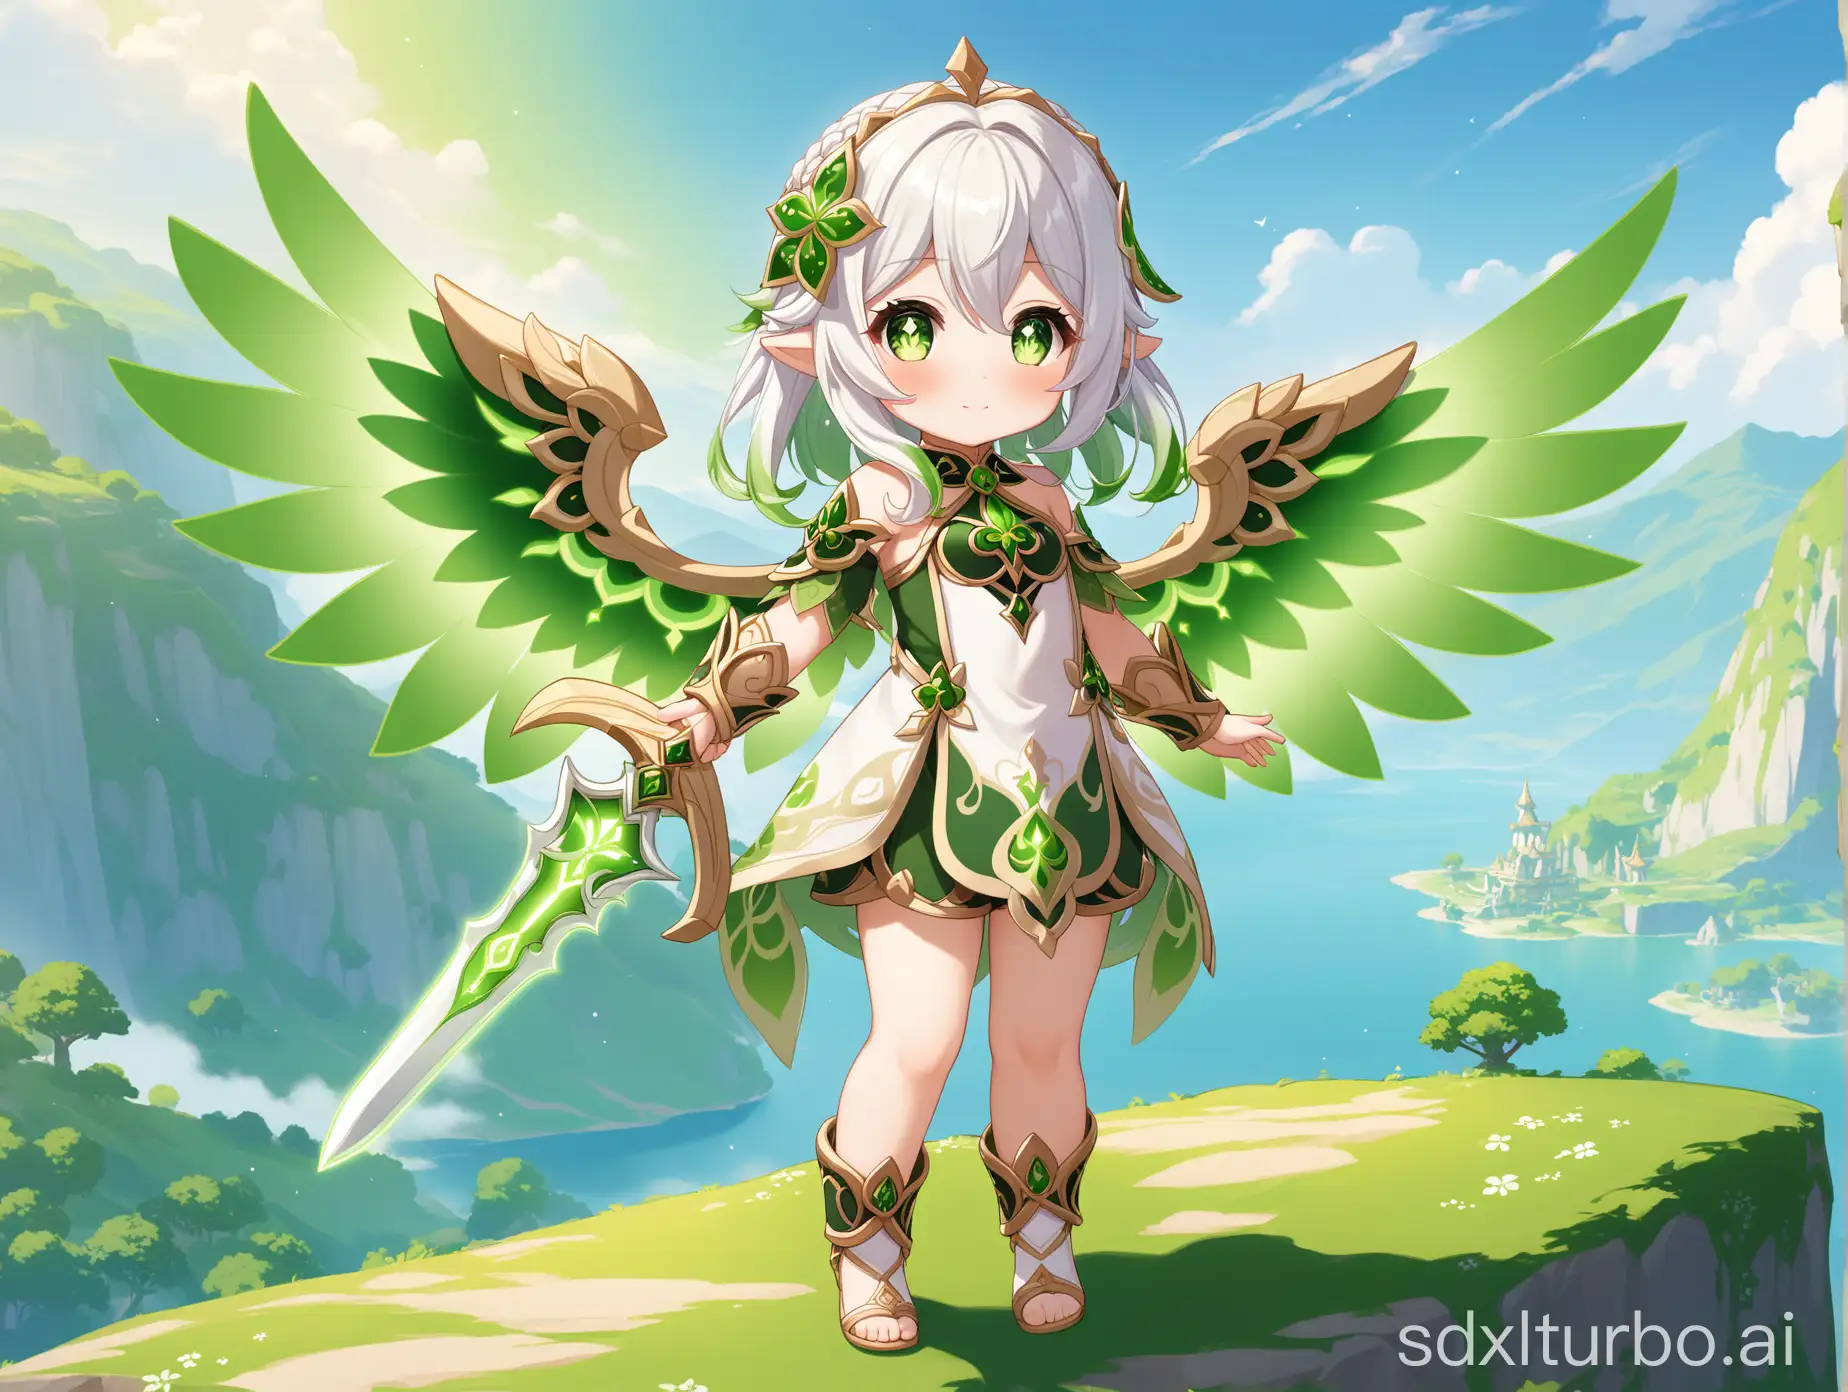 1 girl, Nahida \(genshin Impact\) , Genshin Impact, loli, stands on the mountain, straight stance, angel with green wings behind, hand is raised and holds a green sword, looking to the right  <lora:LECO_LessChibiAndDollsXL:-1.5> good anatomy, natural fingers, best quality, masterpiece rating: general <lora:sdxl2-flat2-512b:-0.5>